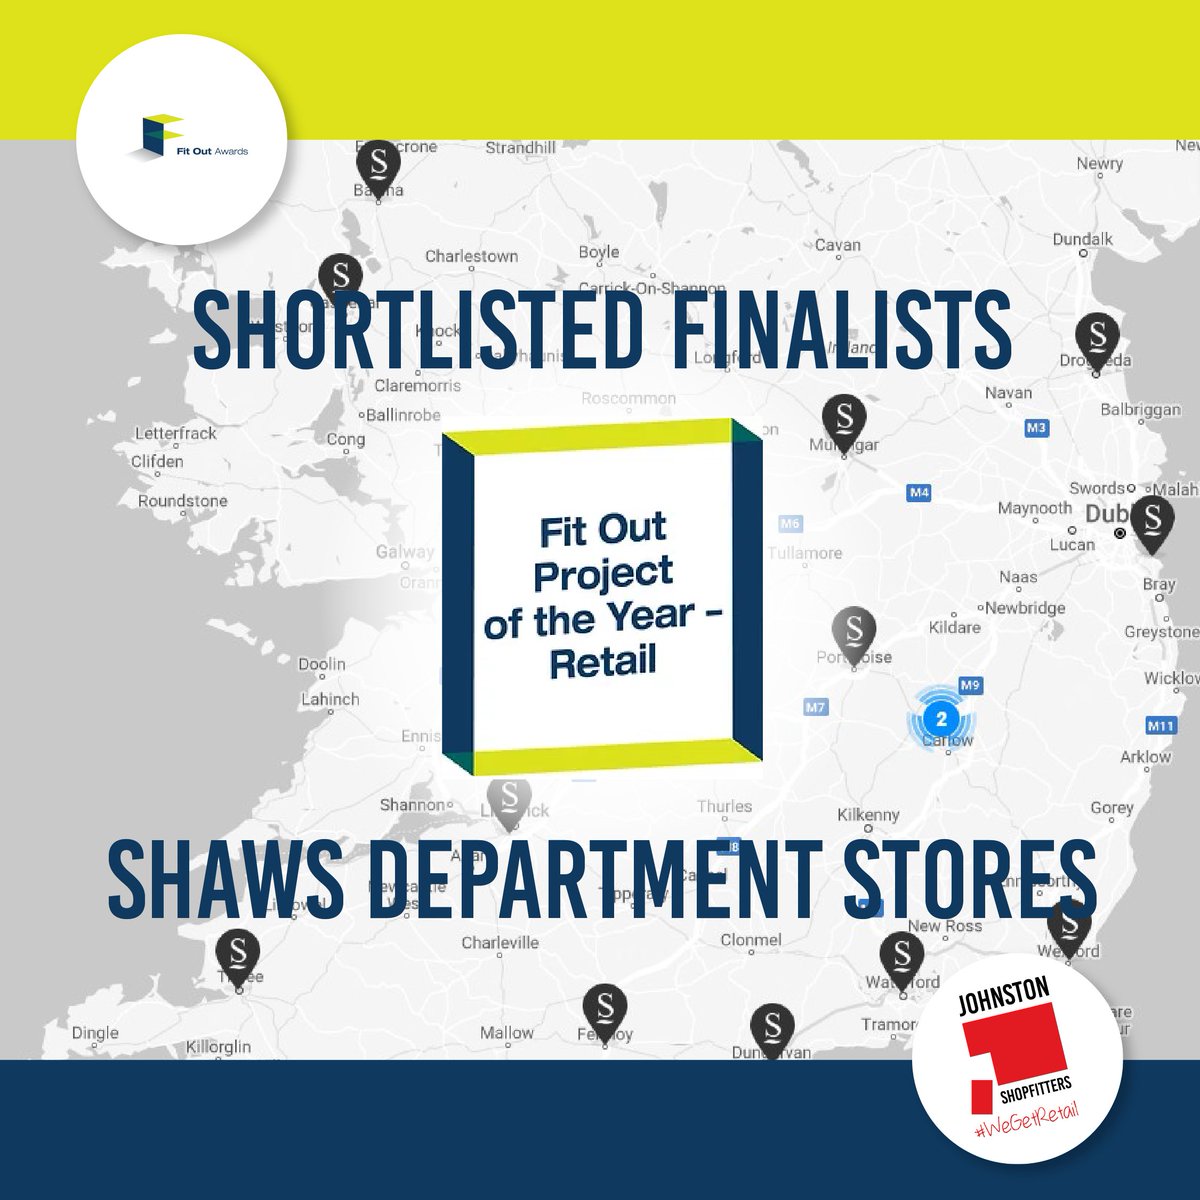 Great excitement in #JohnstonShopfitters today as we are Shortlisted Finalists at this year's @FitOutAwards for both 'Fit-Out Contractor of the Year' & 'Retail Fit-Out Project of the Year' for our work with @ShawsDeptStores #WeGetRetail #ThisIsRetail #FitOutAwards #FitOut #Retail